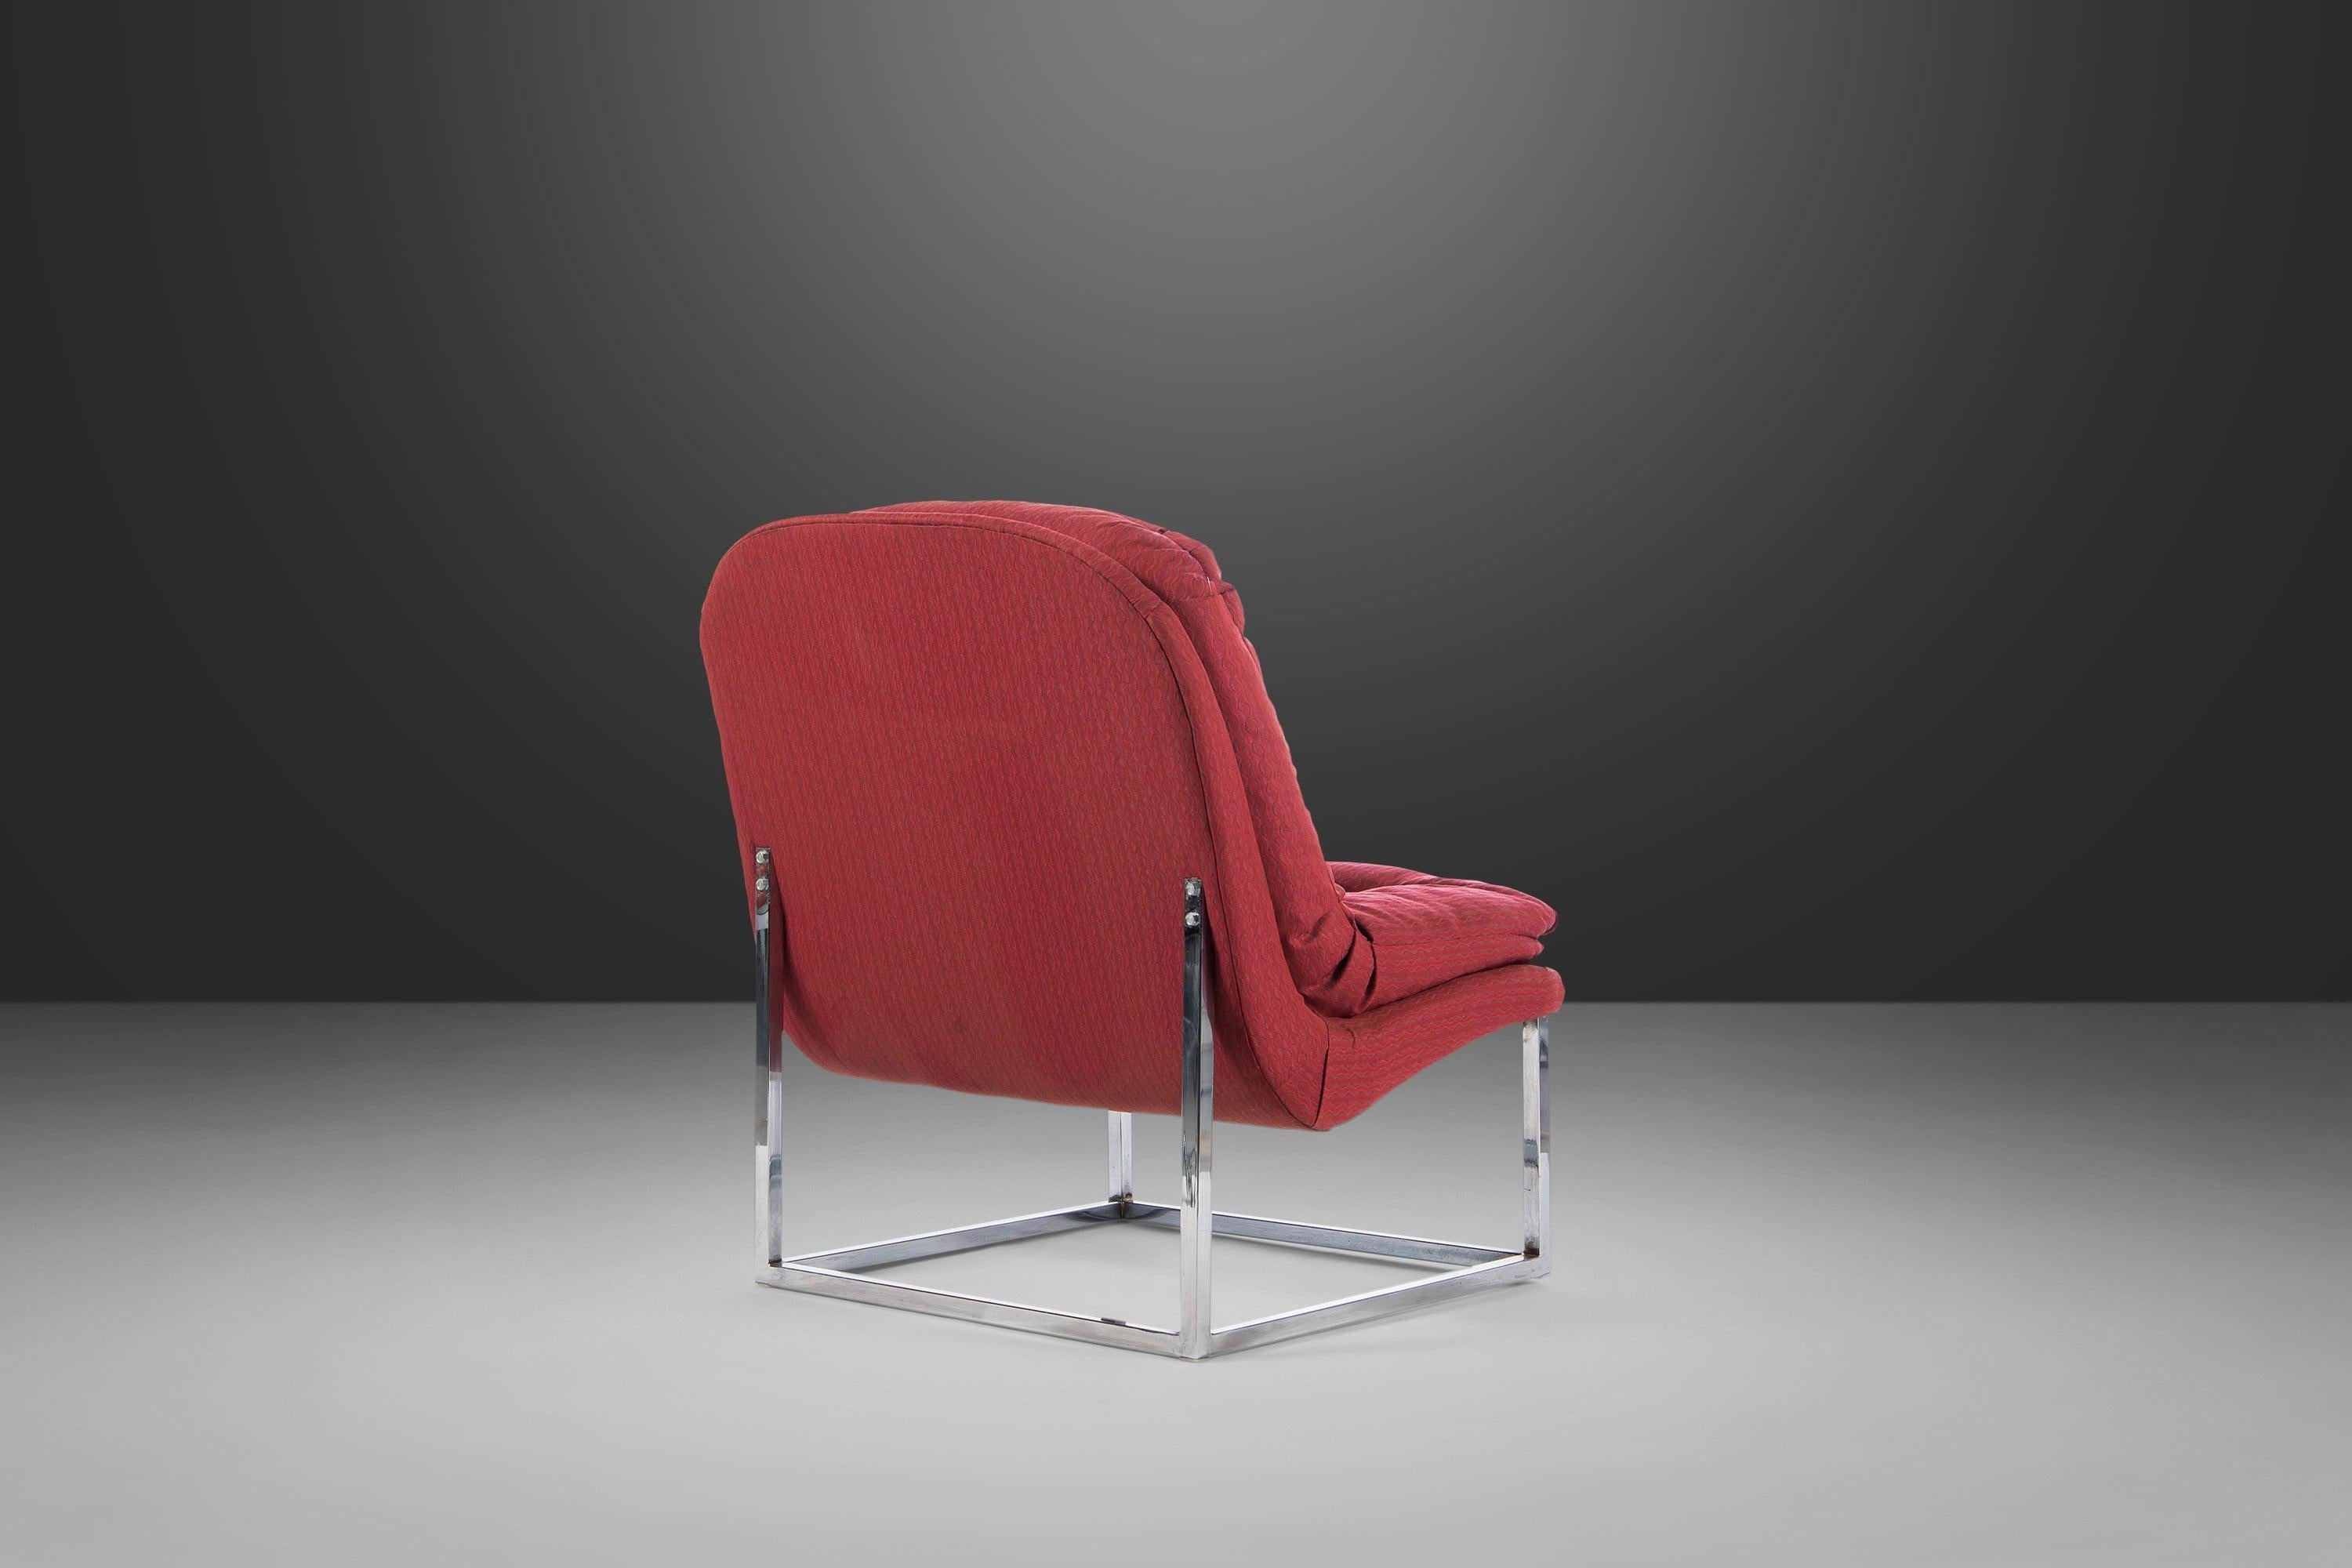 Perfect for a myriad of design pallets these lovely scoop chairs are both playful and bold. With solid chrome frames offset by the lovely raspberry upholstery these fashionable accent chairs are sure to make a statement in any space they inhabit and